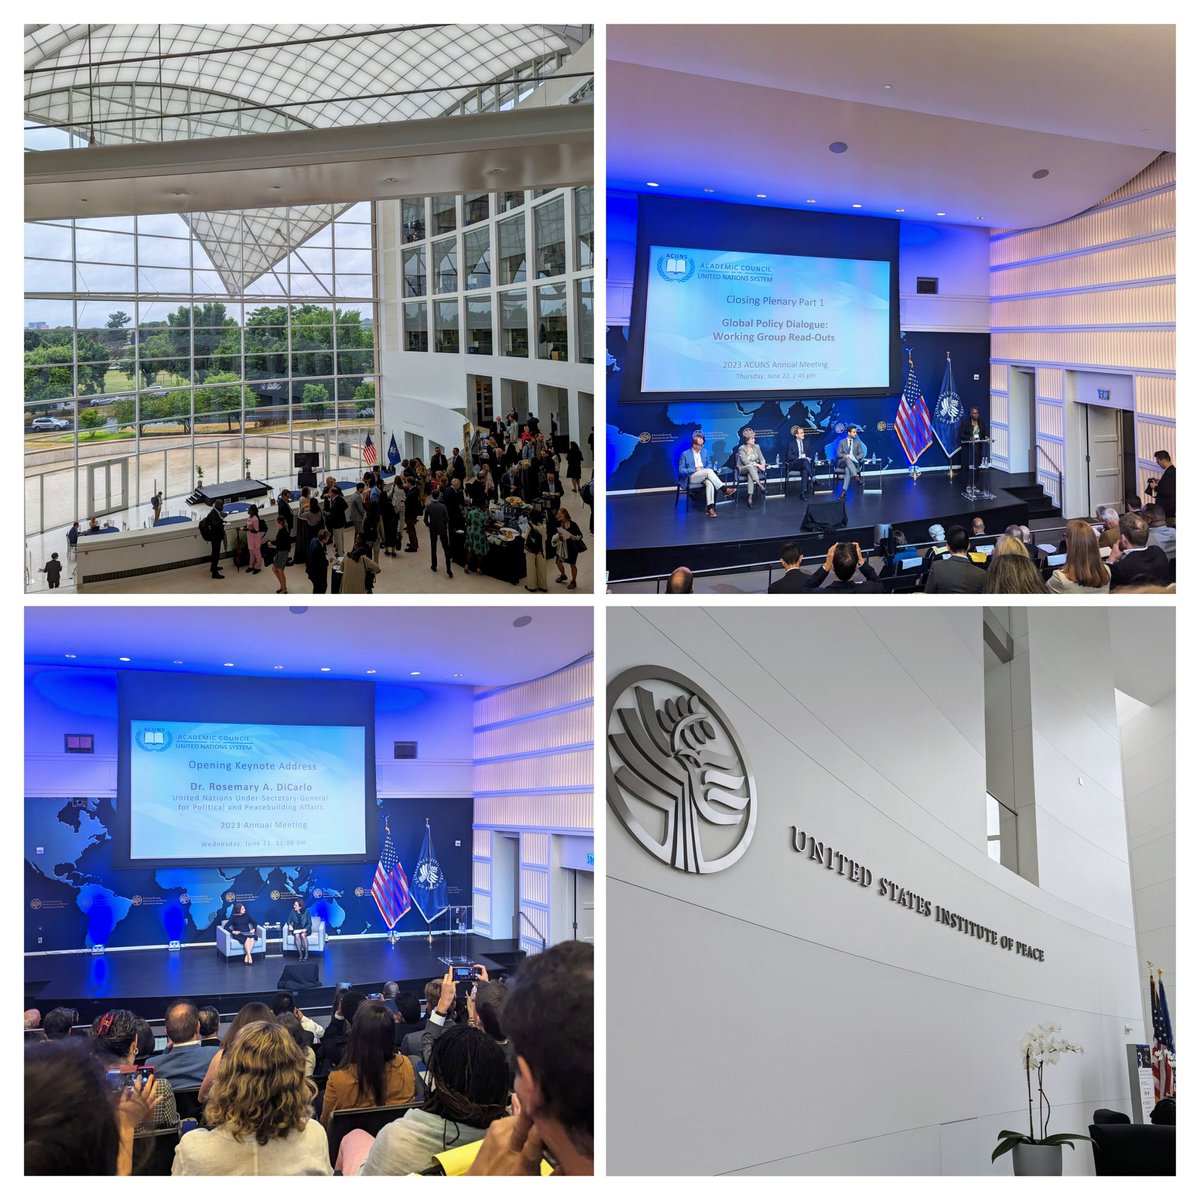 Congratulations to @ACUNStweets and thanks to president @HowardLise, exec director Martha Thomas & team for a very successful annual meeting hosted at @usip, convening scholars and practitioners to debate innovations for UN-led multilateralism and a global peace architecture.